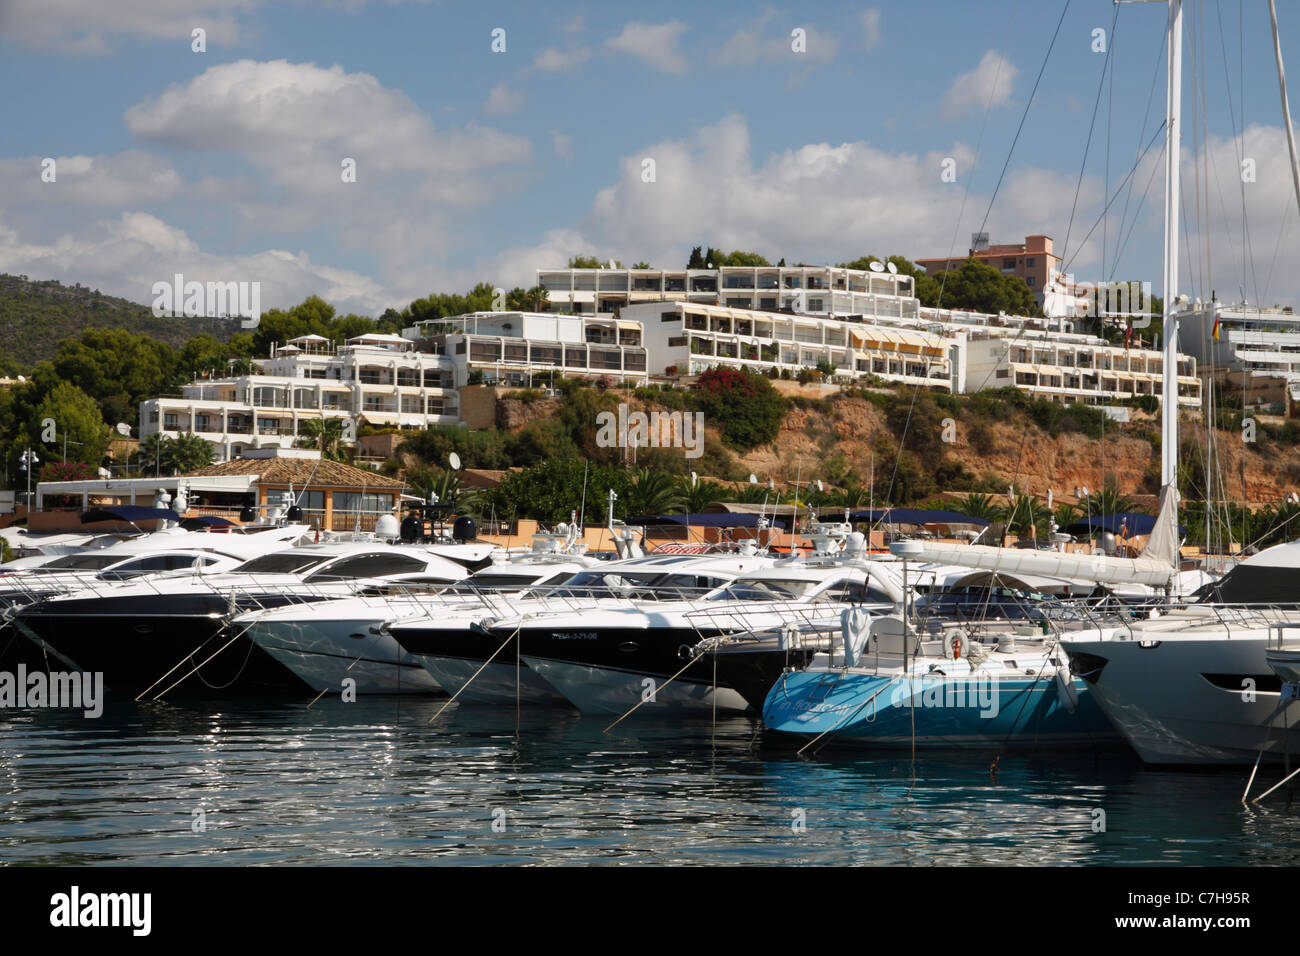 Portals Nous resort with yachts and cliff apartments Stock Photo